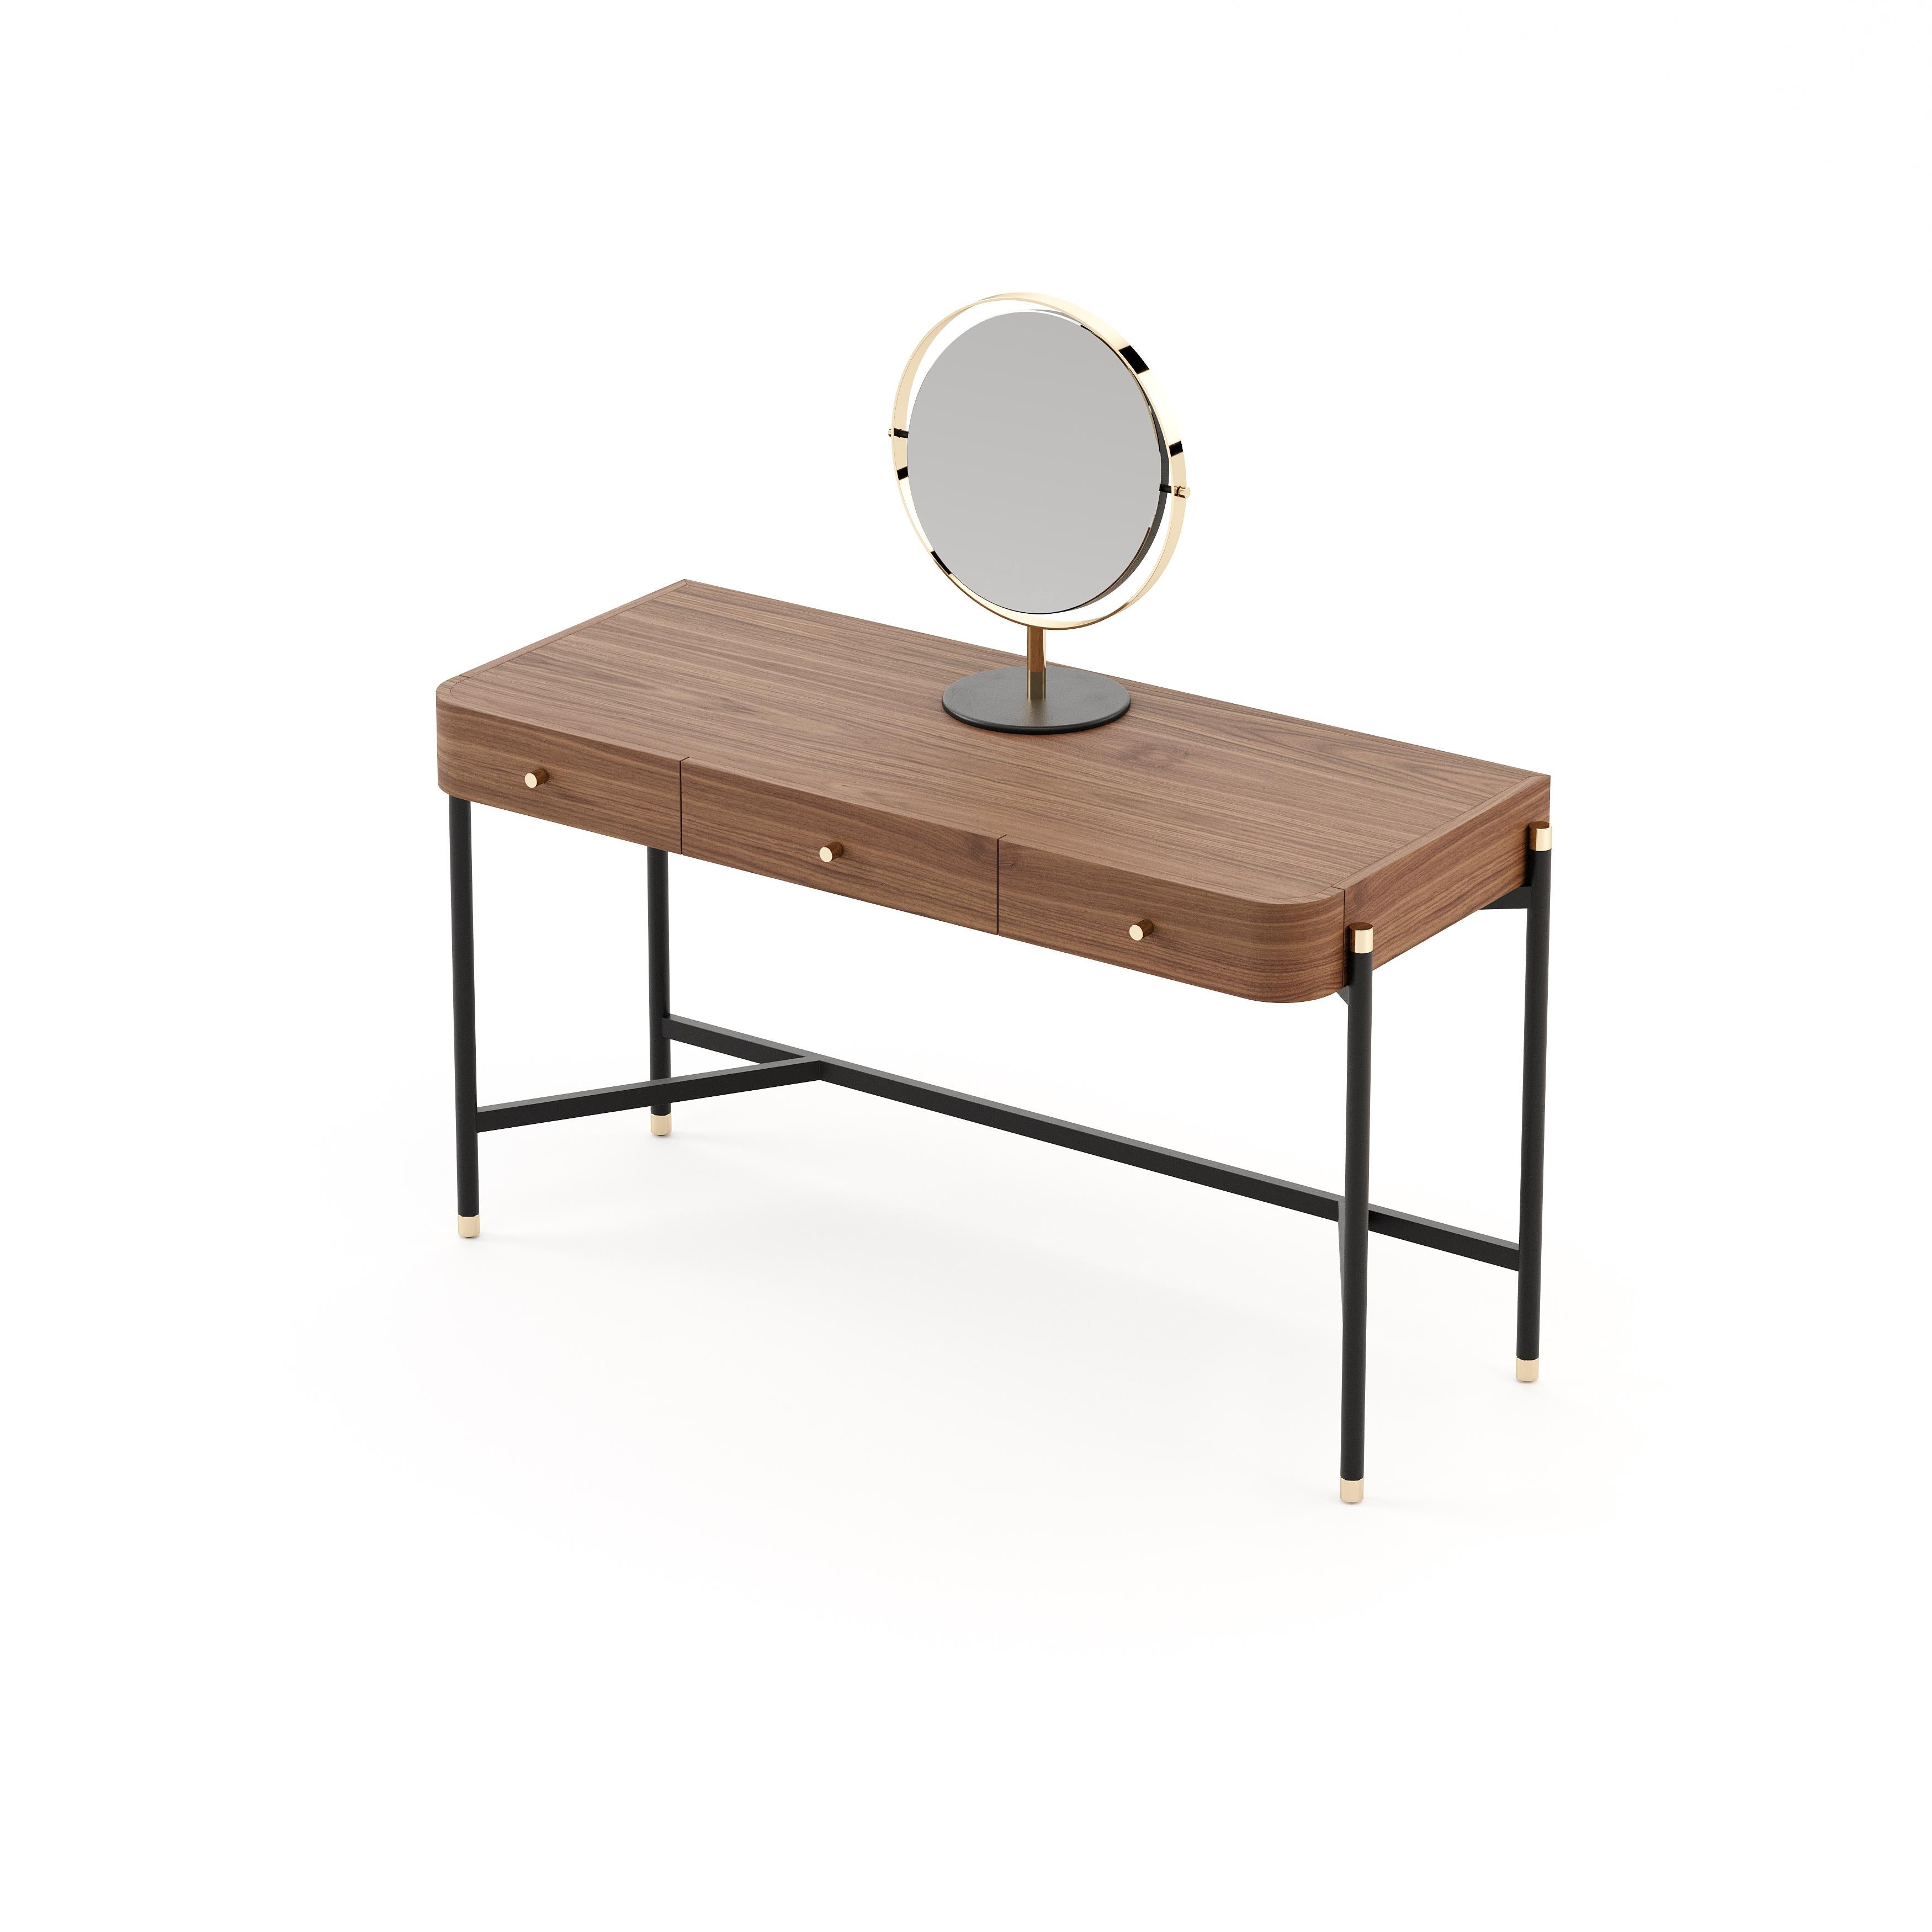 Rosie dressing table by Laskasas is an iconic feminine piece that adds elegance to any bedroom. Exploring mid-century style with seductive lines, this is a dressing table with a timeless essence. Rosie is an outstanding addition to a glamorous